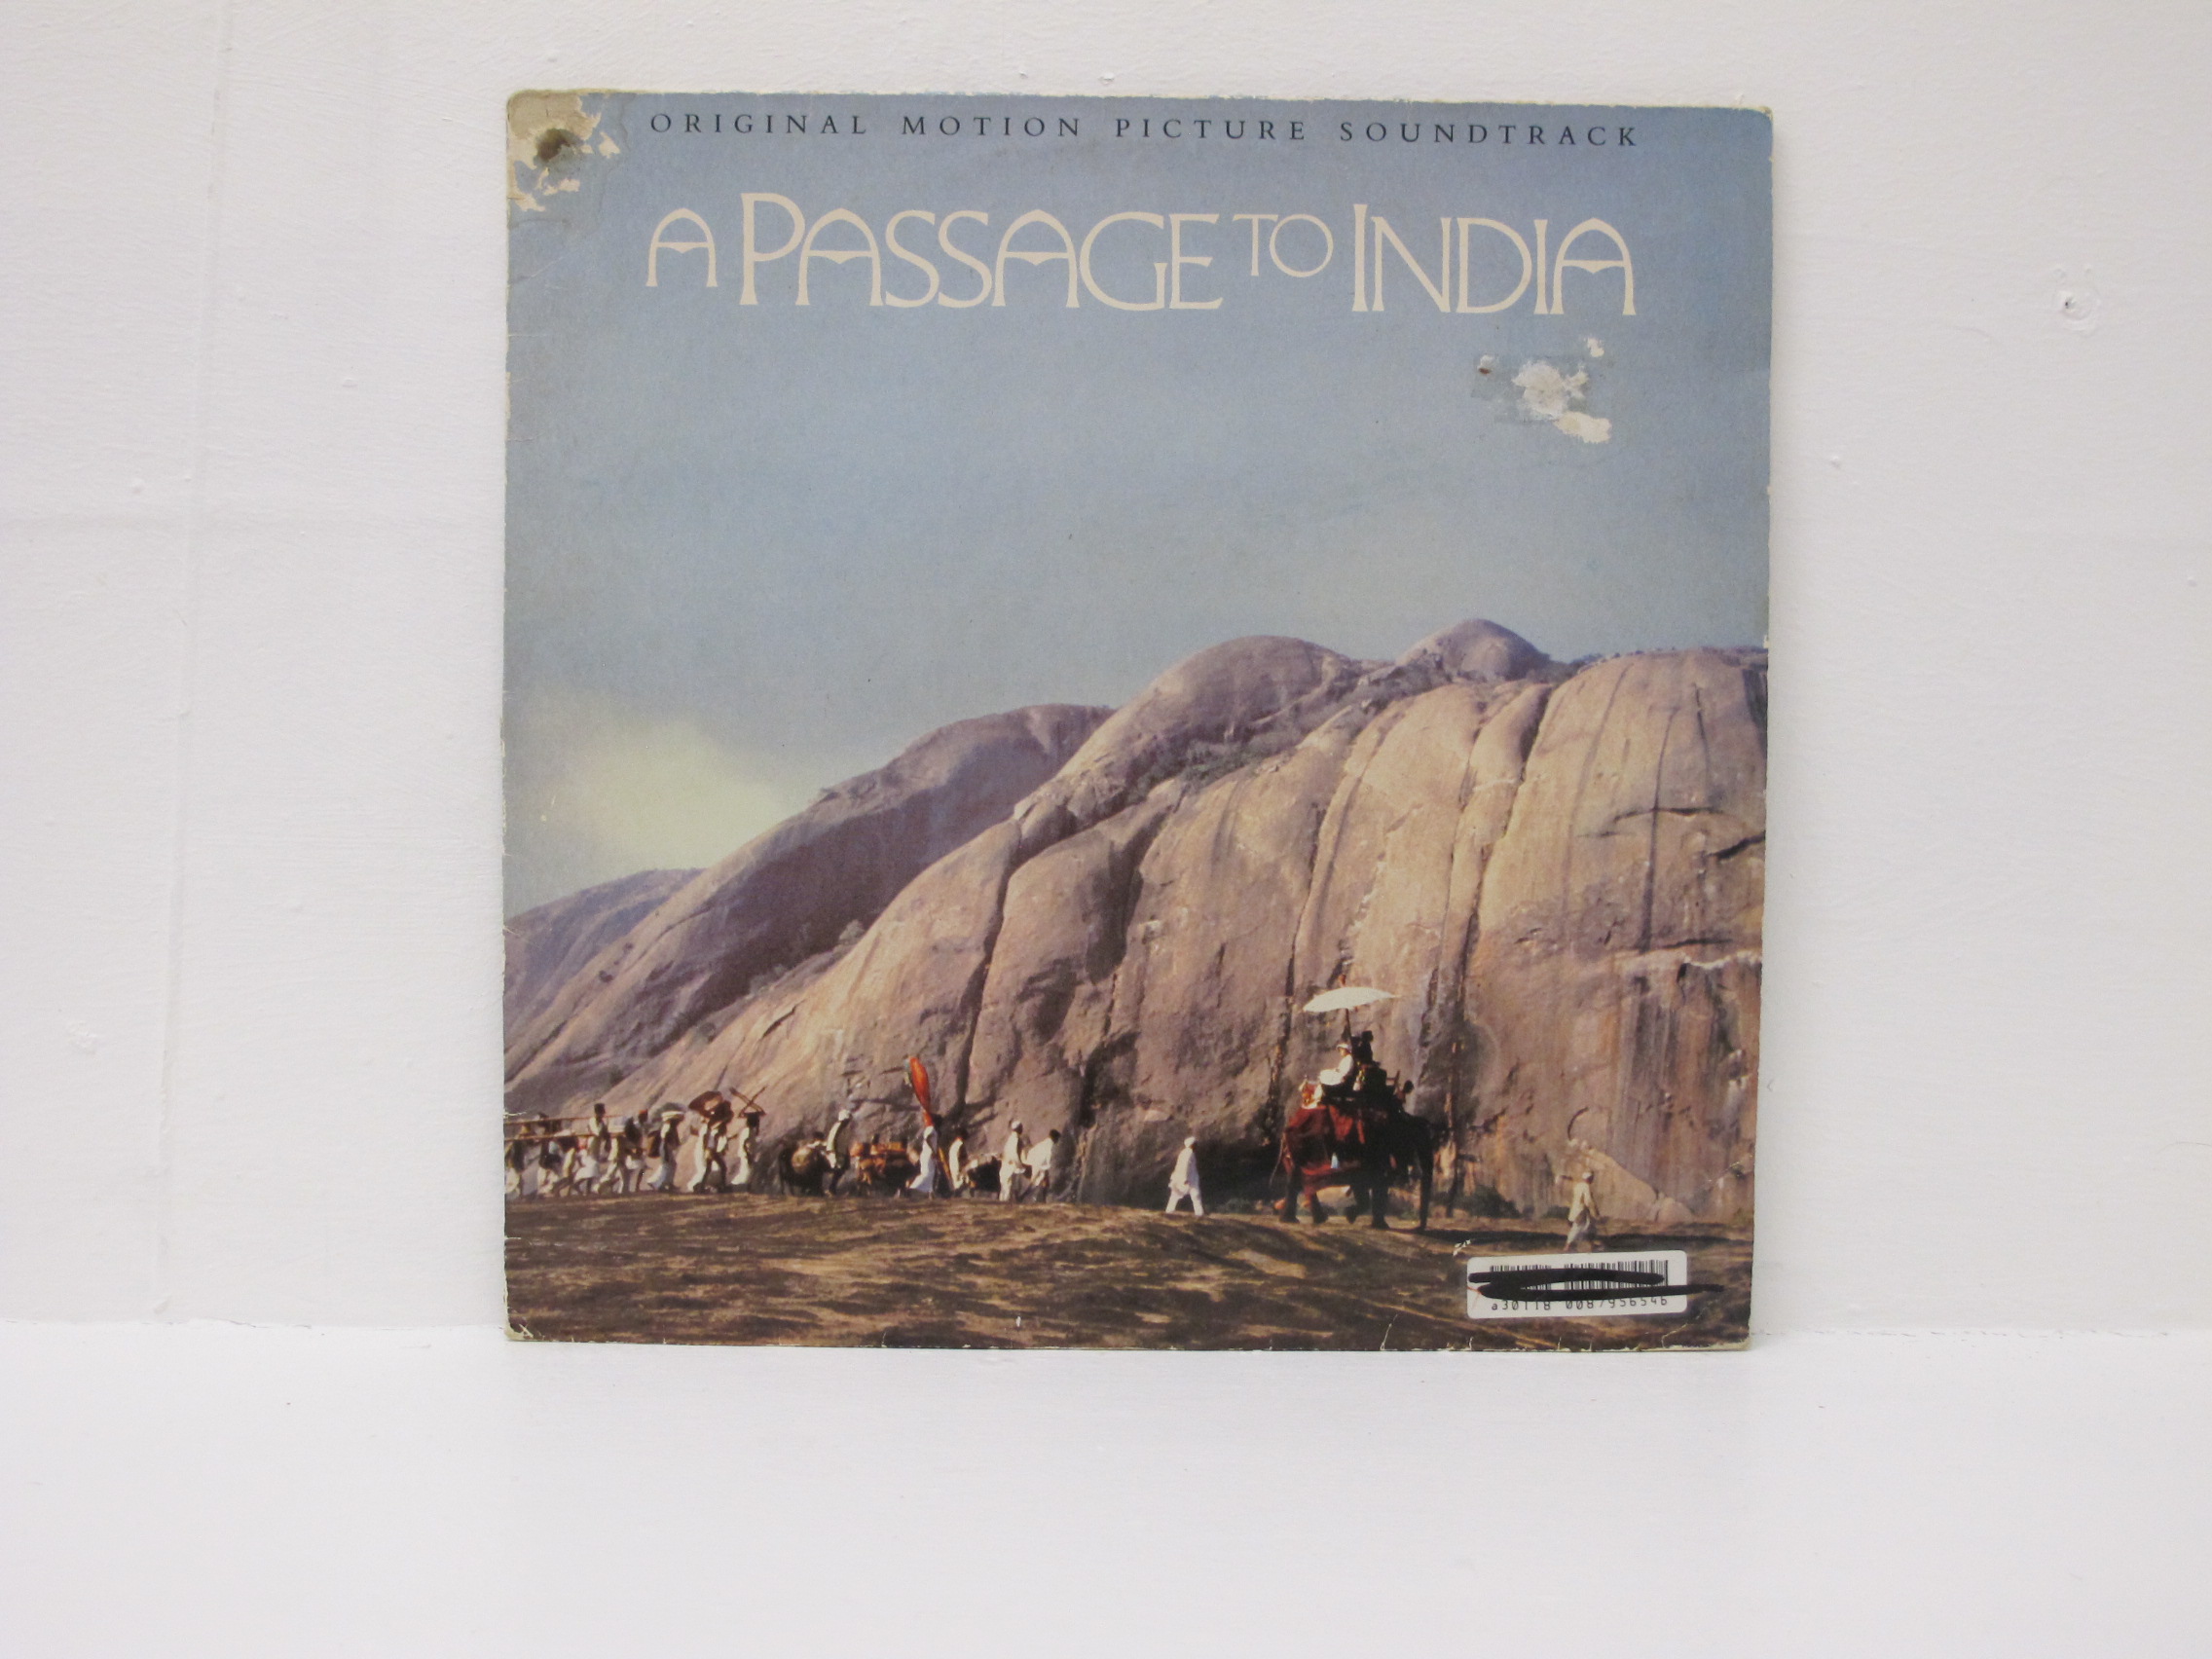 A Passage To India - Soundtrack